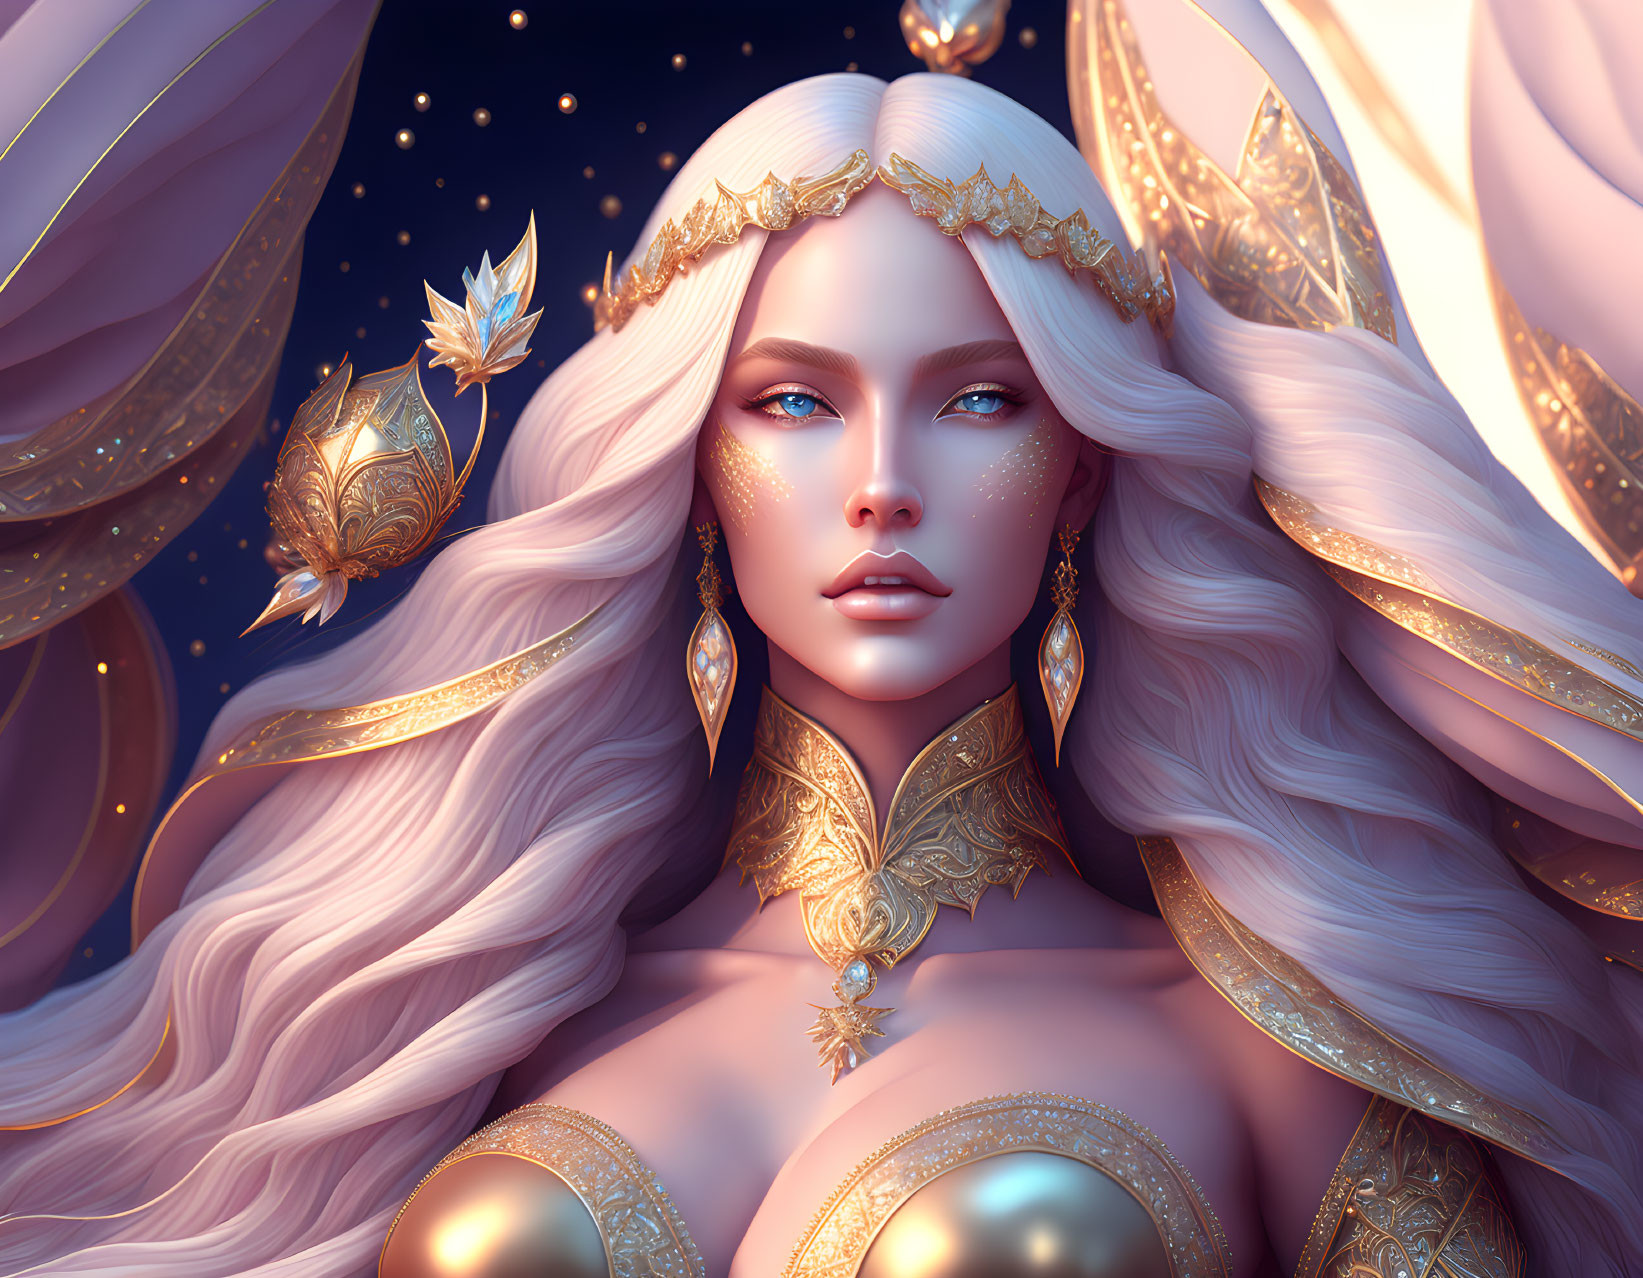 Fantasy digital artwork of woman with white hair in golden attire on starry night.